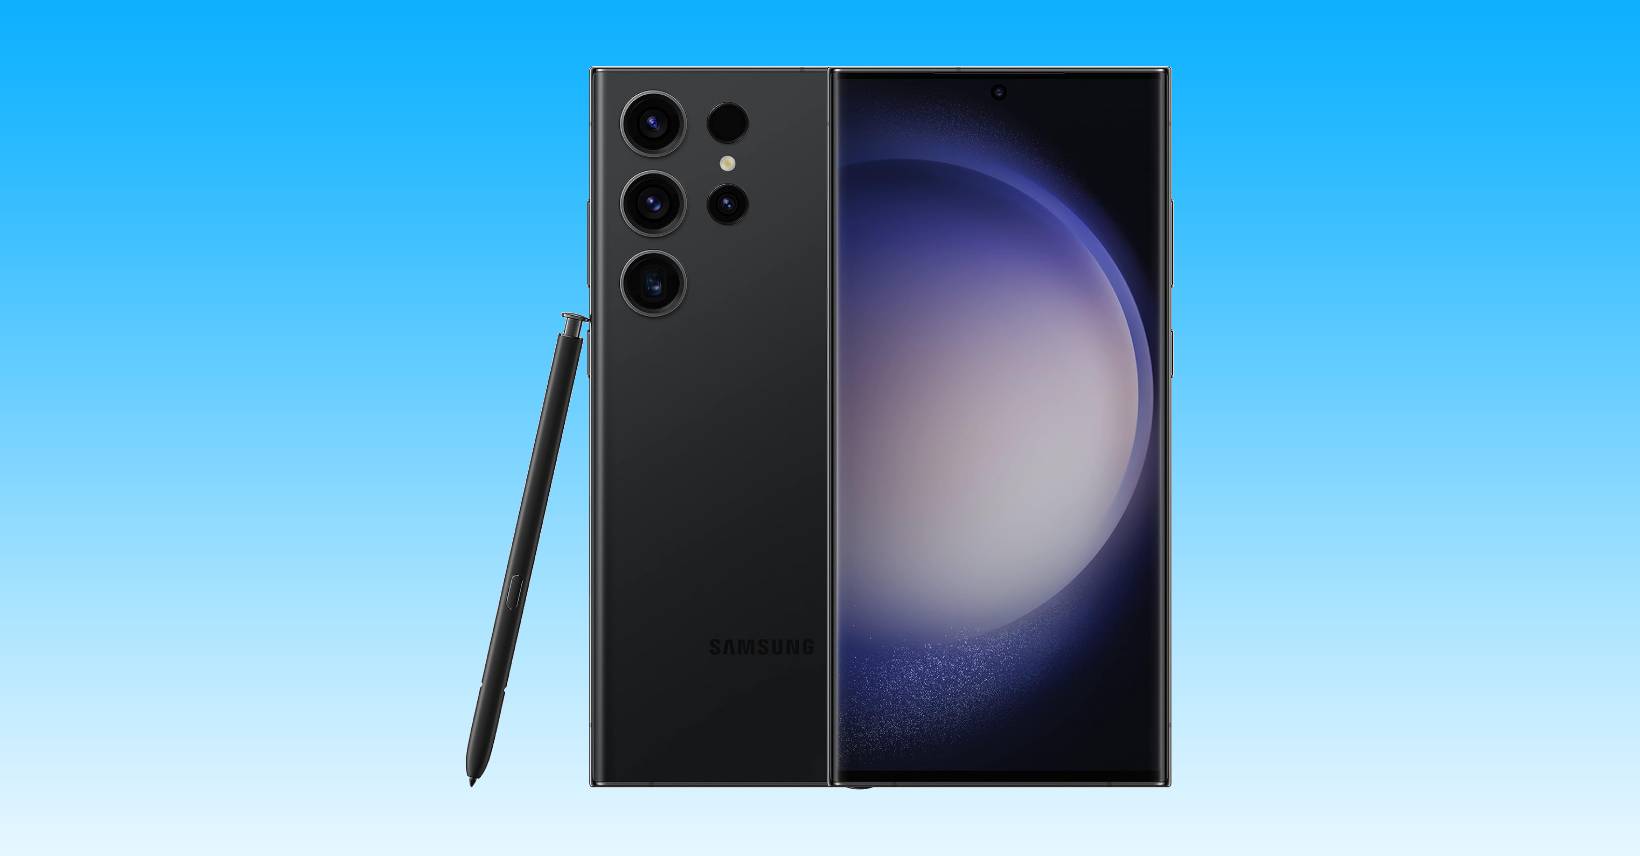 The Samsung Galaxy Note 10 is shown on a blue background.